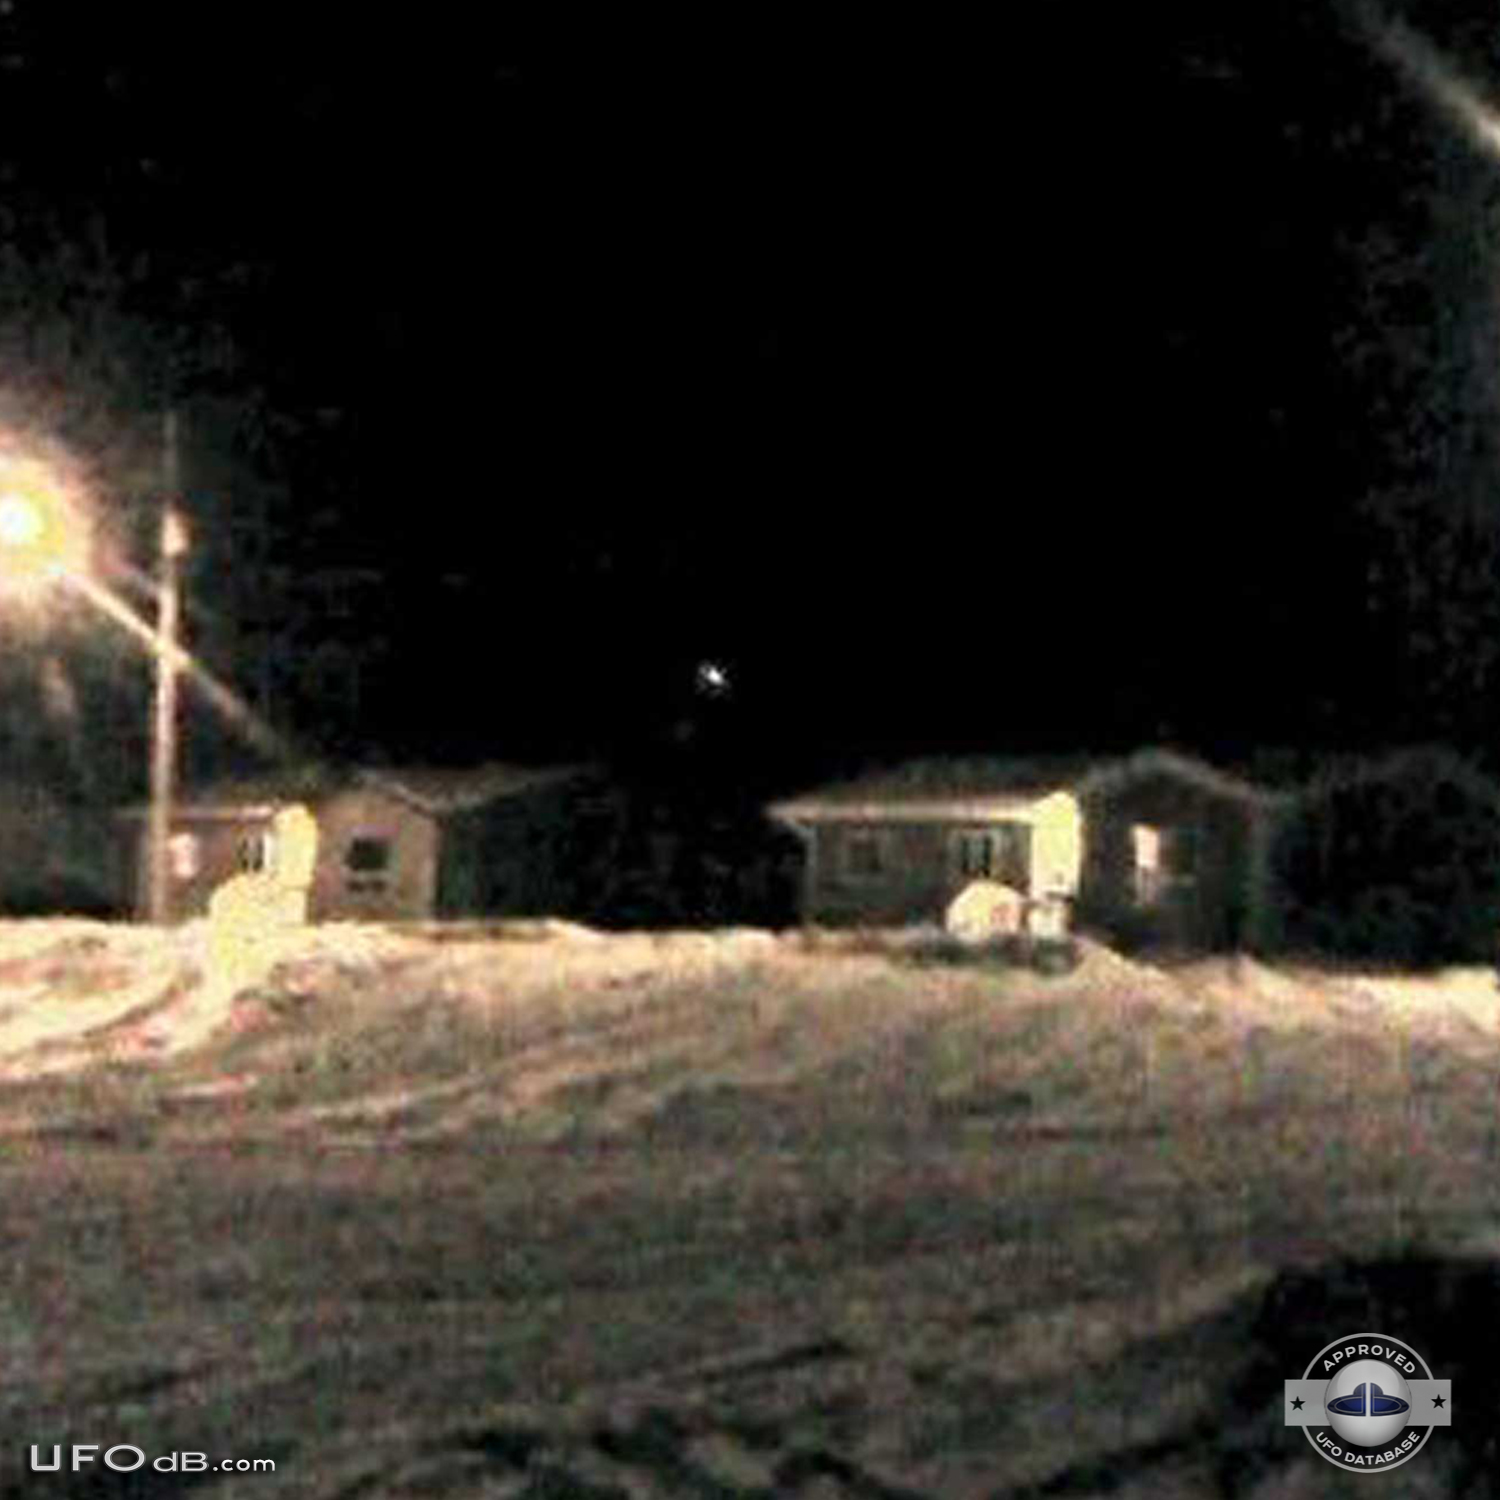 Much too low to be a star - UFO picture in Saskatchewan, Canada 2012 UFO Picture #403-2